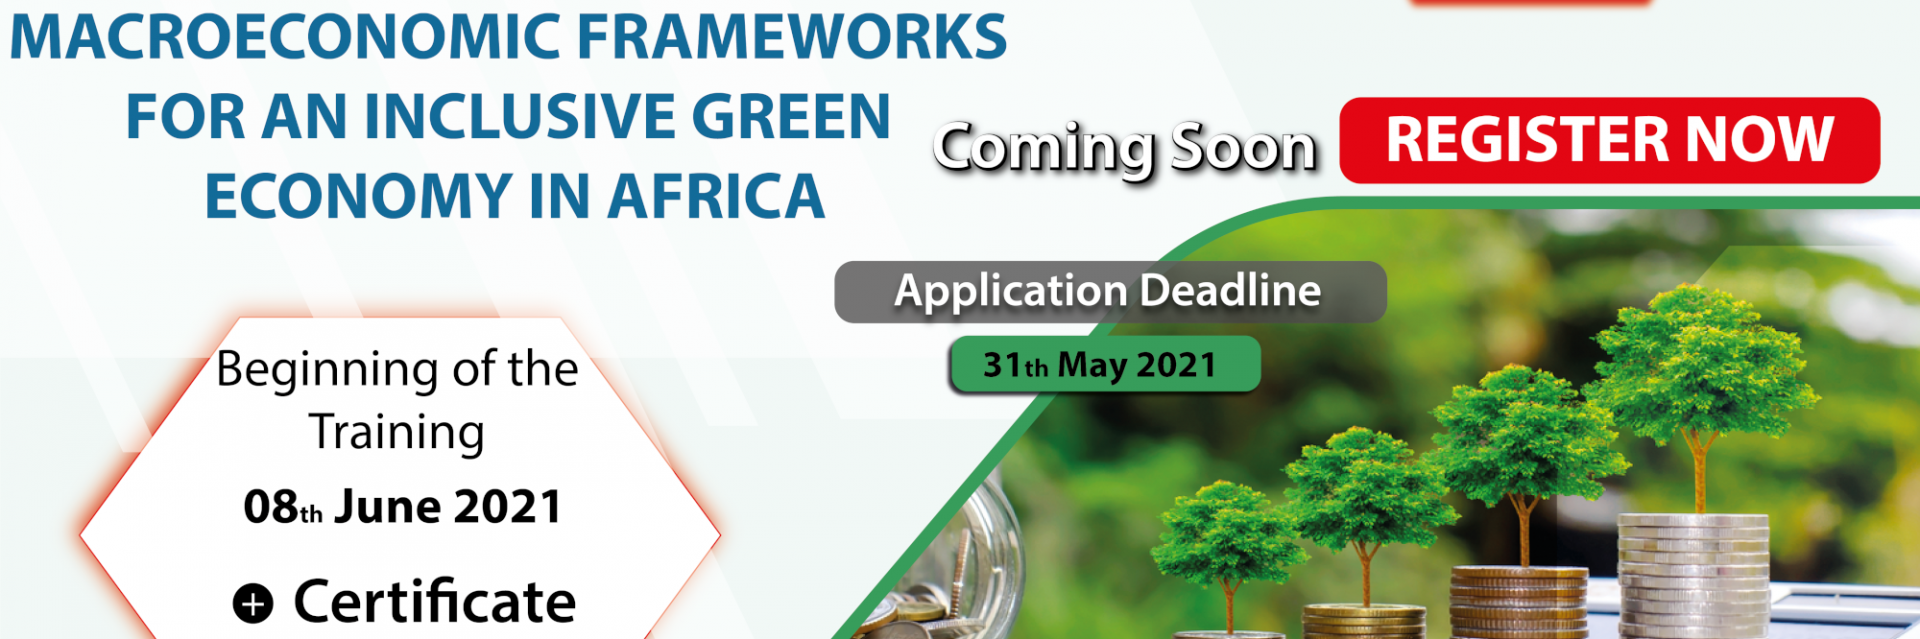 Macroeconomic Framework for an Inclusive Green Economy in Africa